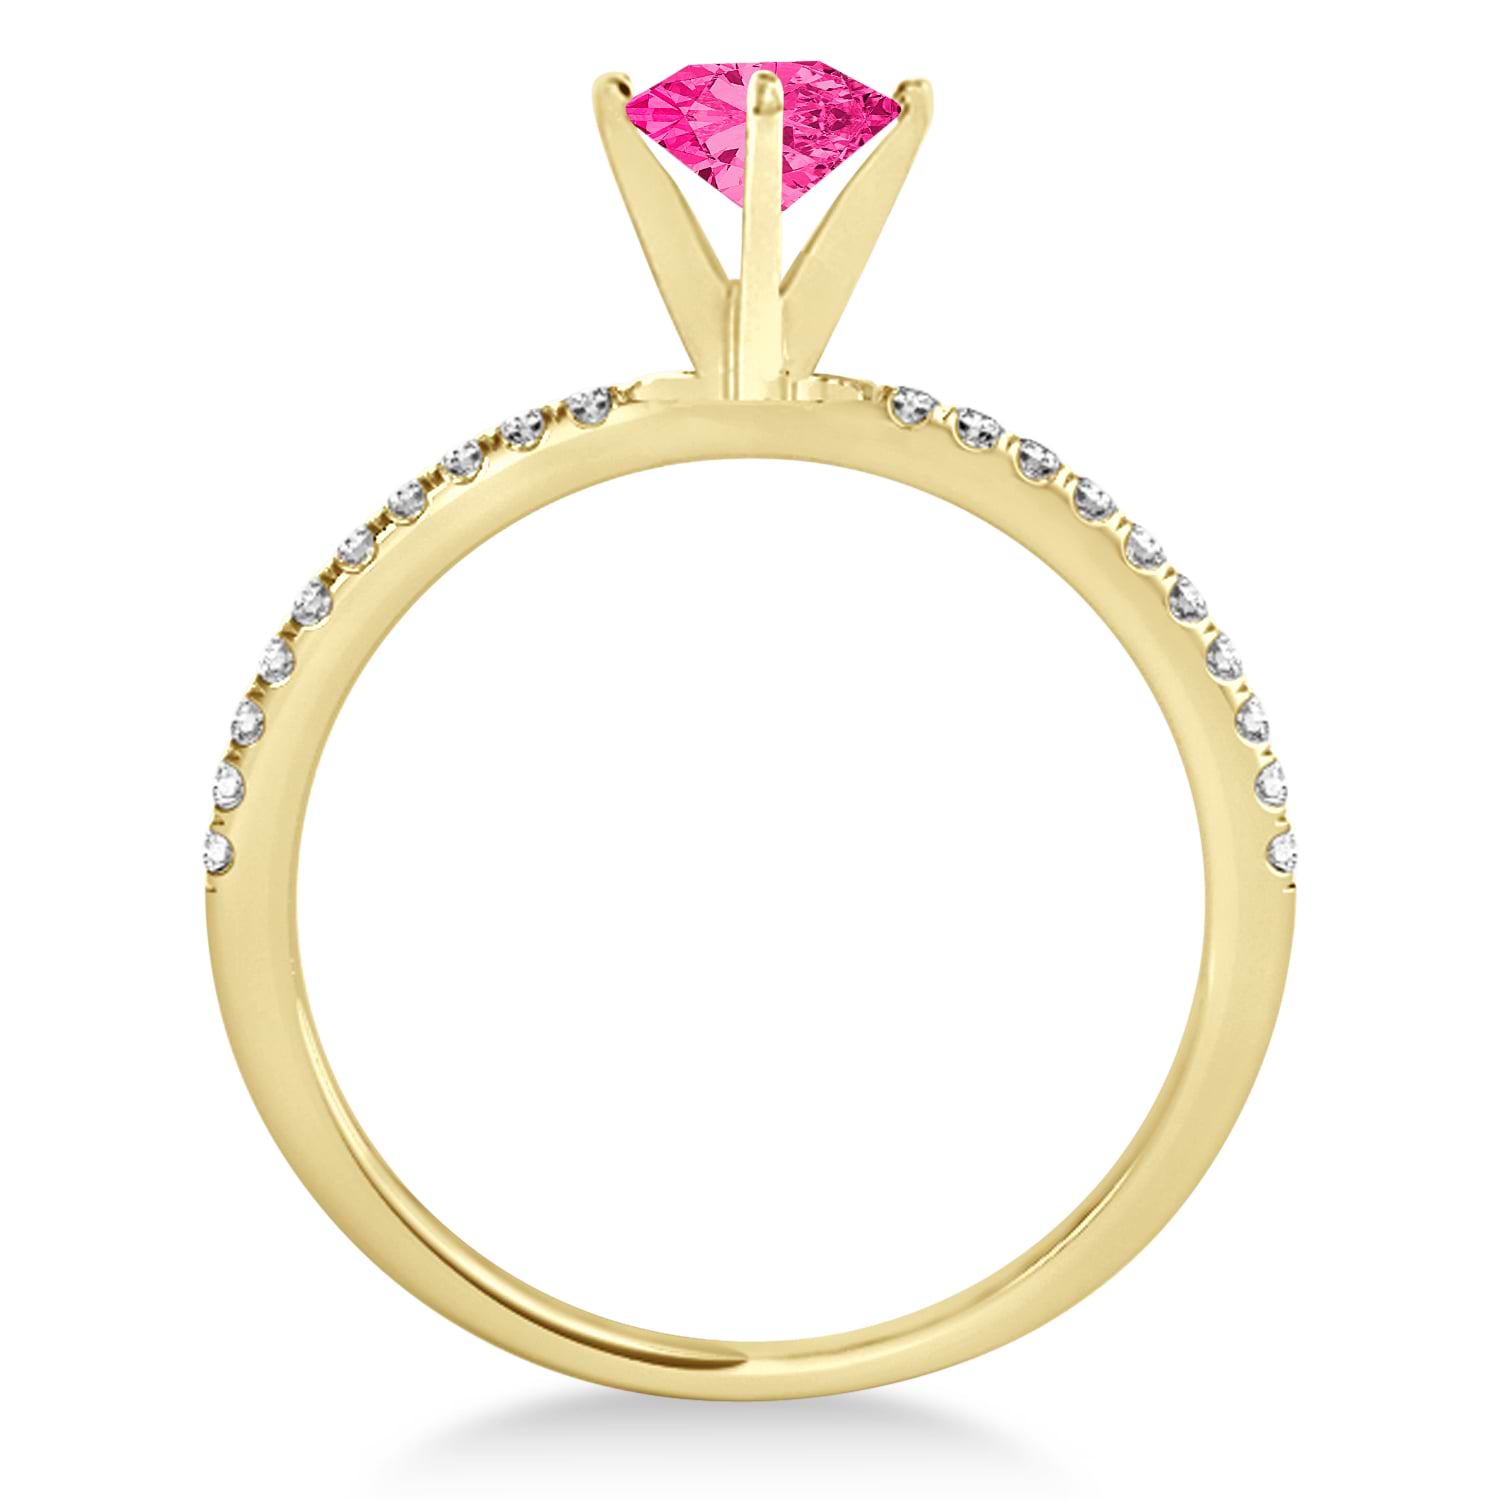 Pink Tourmaline & Diamond Accented Oval Shape Engagement Ring 14k Yellow Gold (3.00ct)